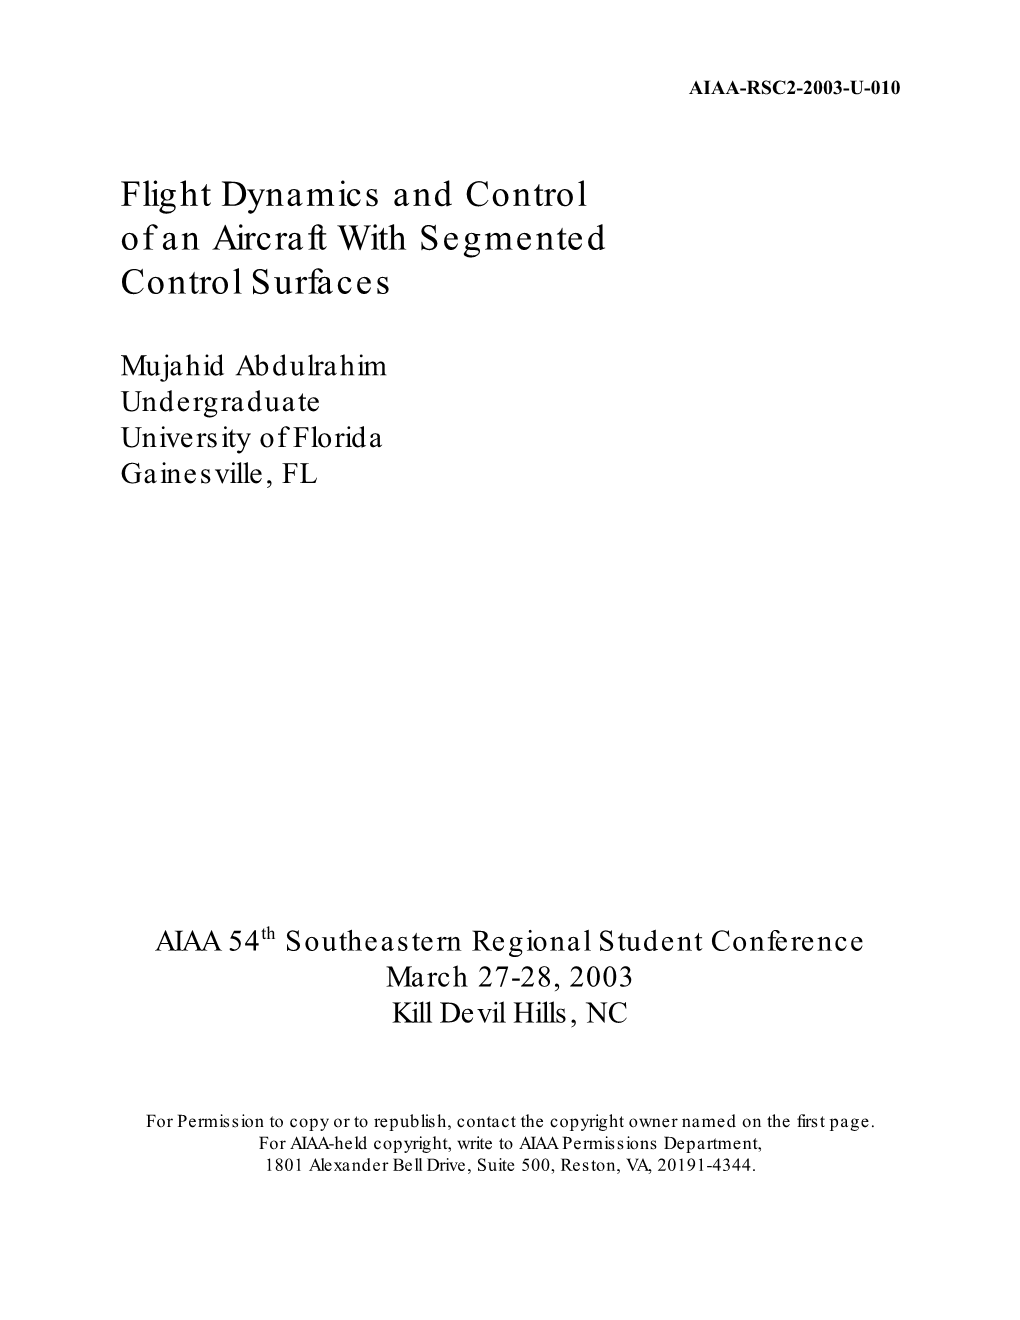 Flight Dynamics and Control of an Aircraft with Segmented Control Surfaces